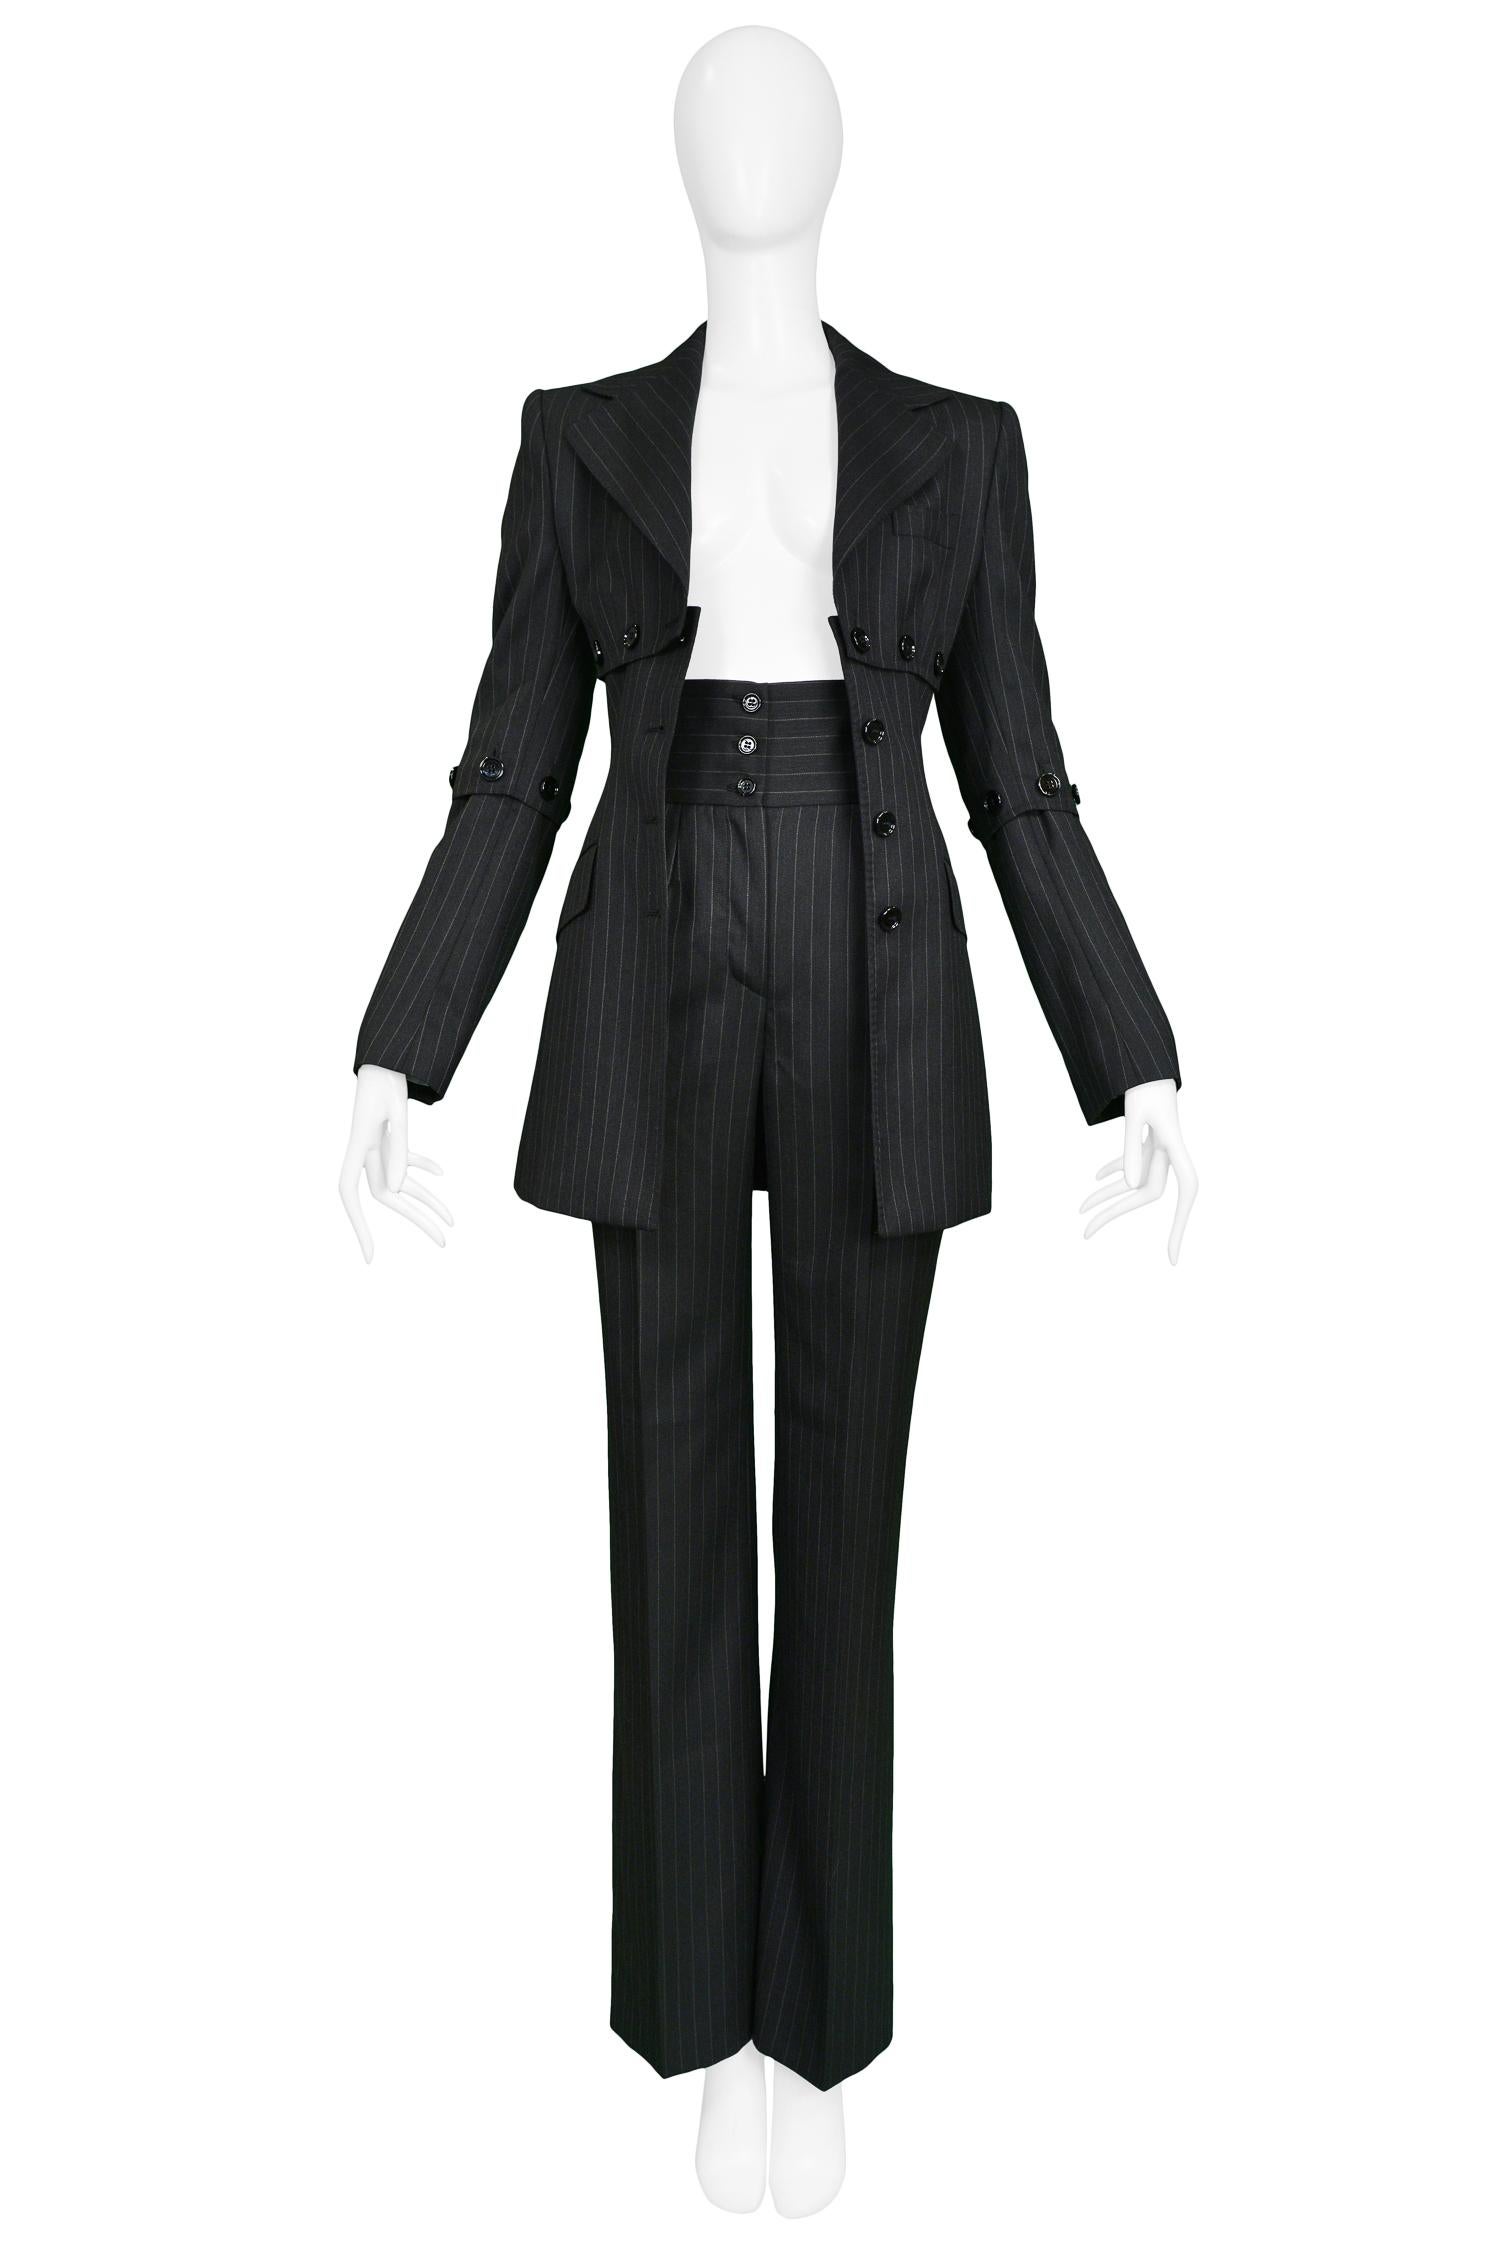 Vintage Dolce & Gabbana cashmere blend charcoal pinstripe pantsuit featuring high waisted pants with 3 button closure and button detail under chest, back & arms. 

Excellent Condition.

 Size - JACKET: 40, PANTS: 38